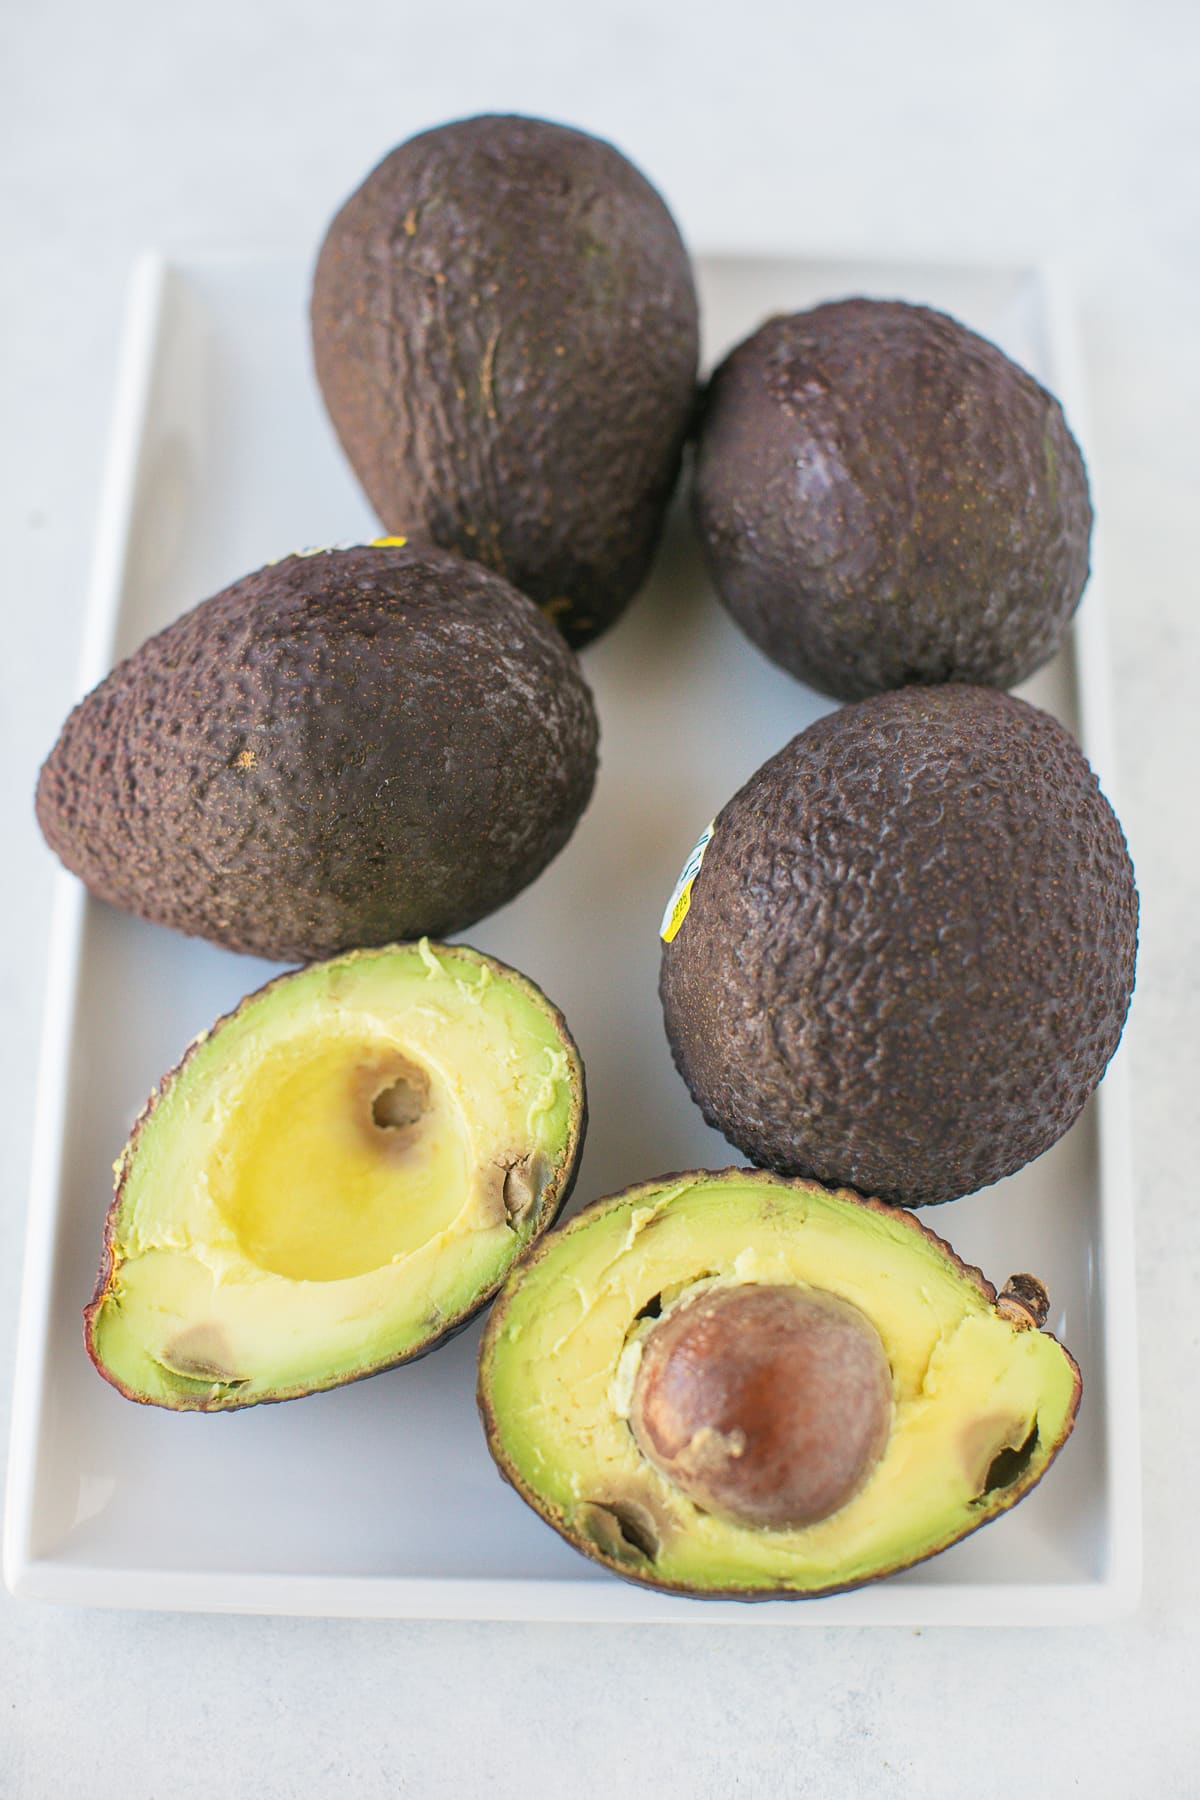 https://www.cleaneatingkitchen.com/wp-content/uploads/2020/04/how-to-freeze-ripe-avocados-1.jpg